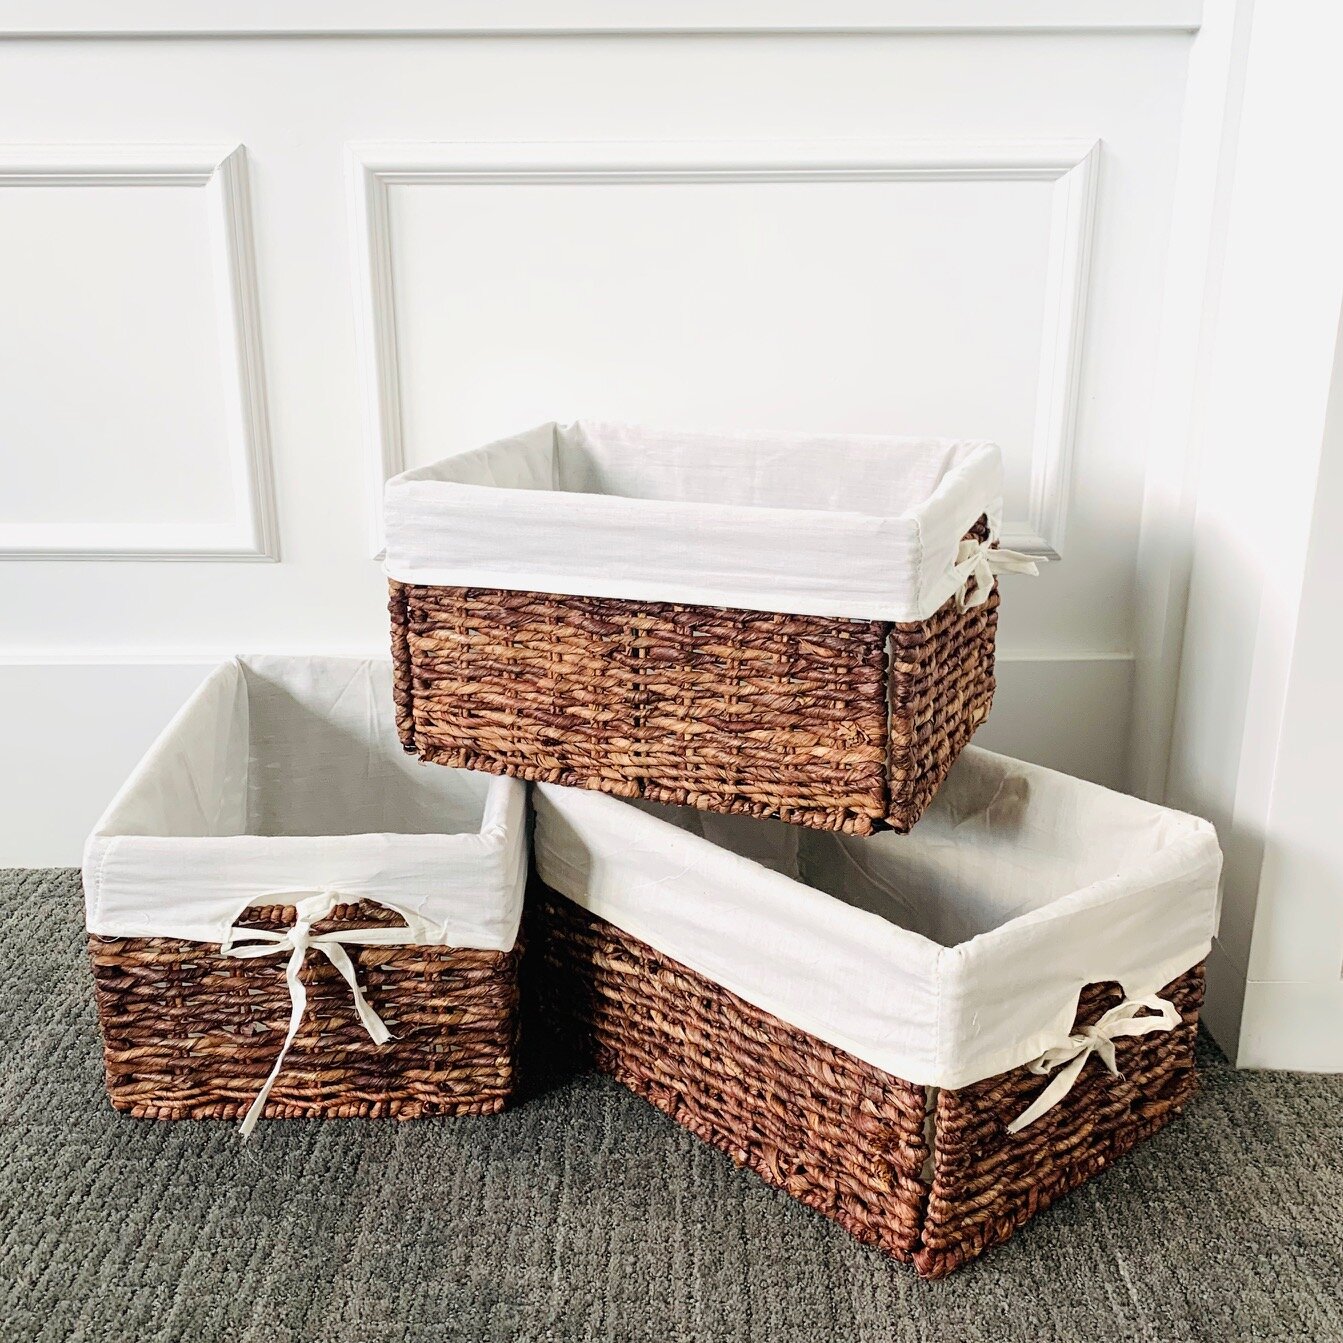 5 Piece Grey Wicker Baskets with Cloth Lining for Storage, Lined